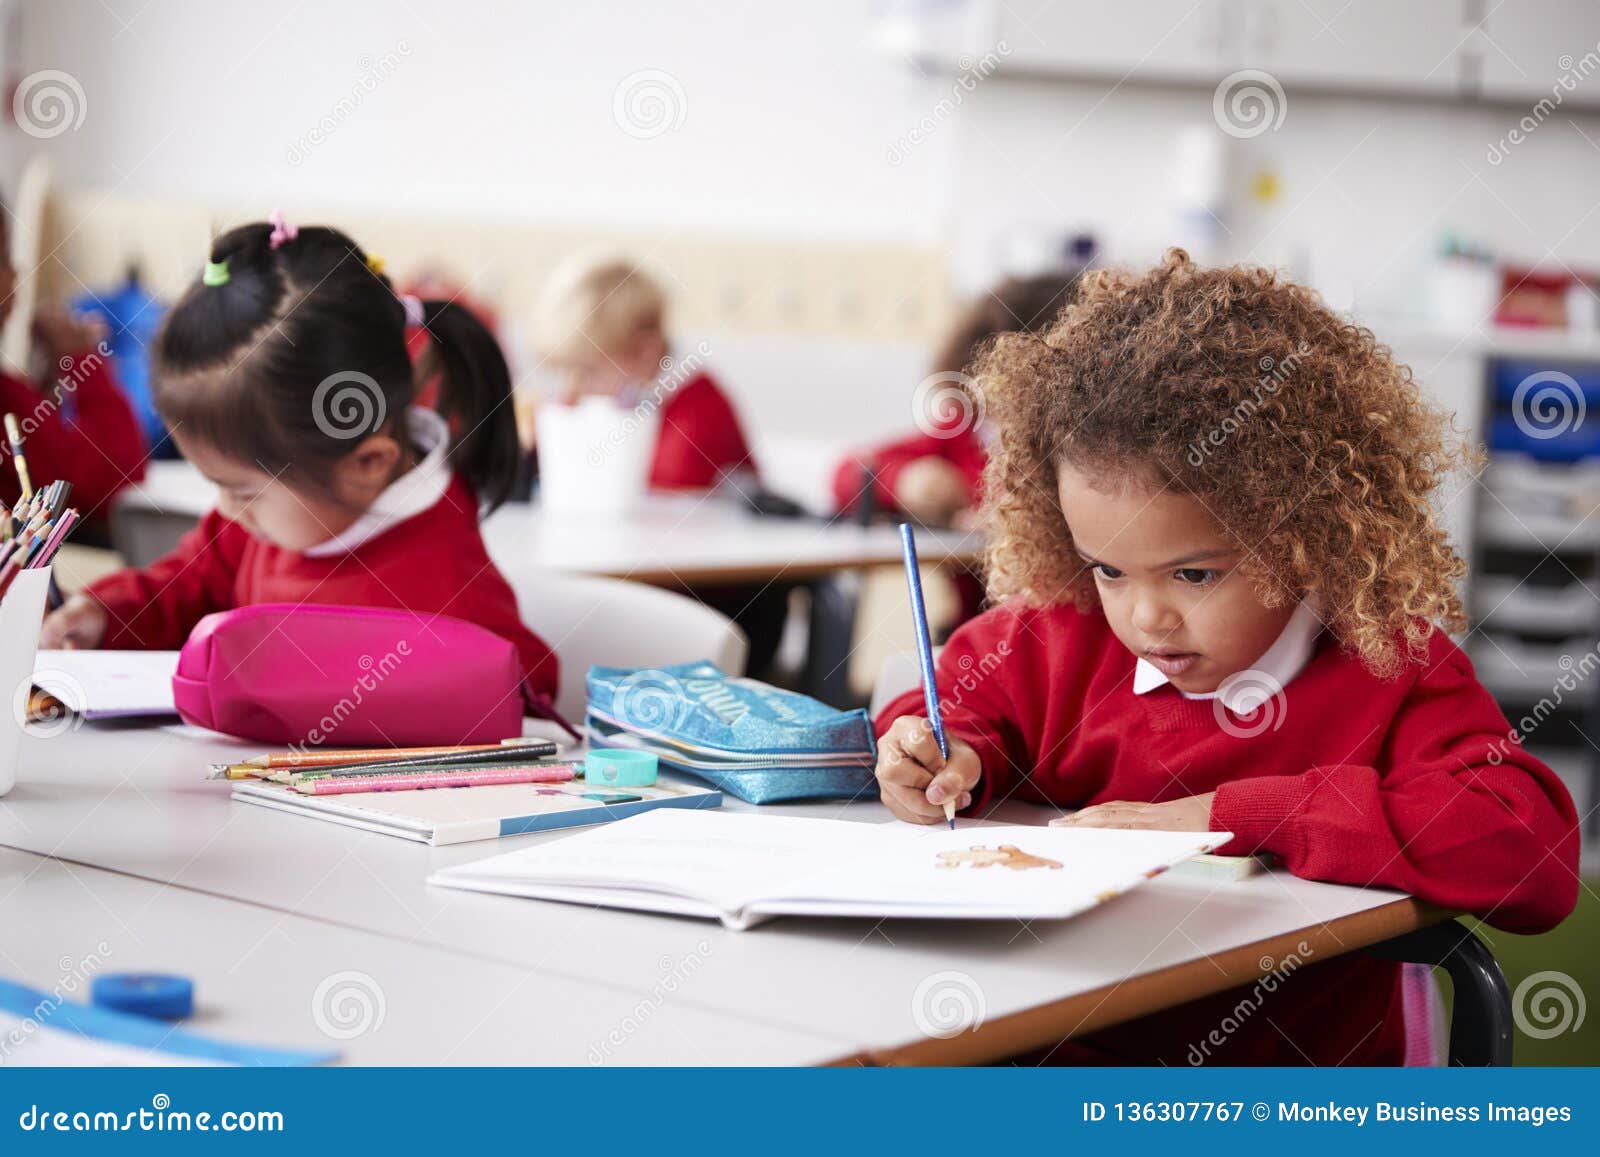 young schoolgirl wearing school uniform sitting at a desk in an infant school classroom drawing, close up